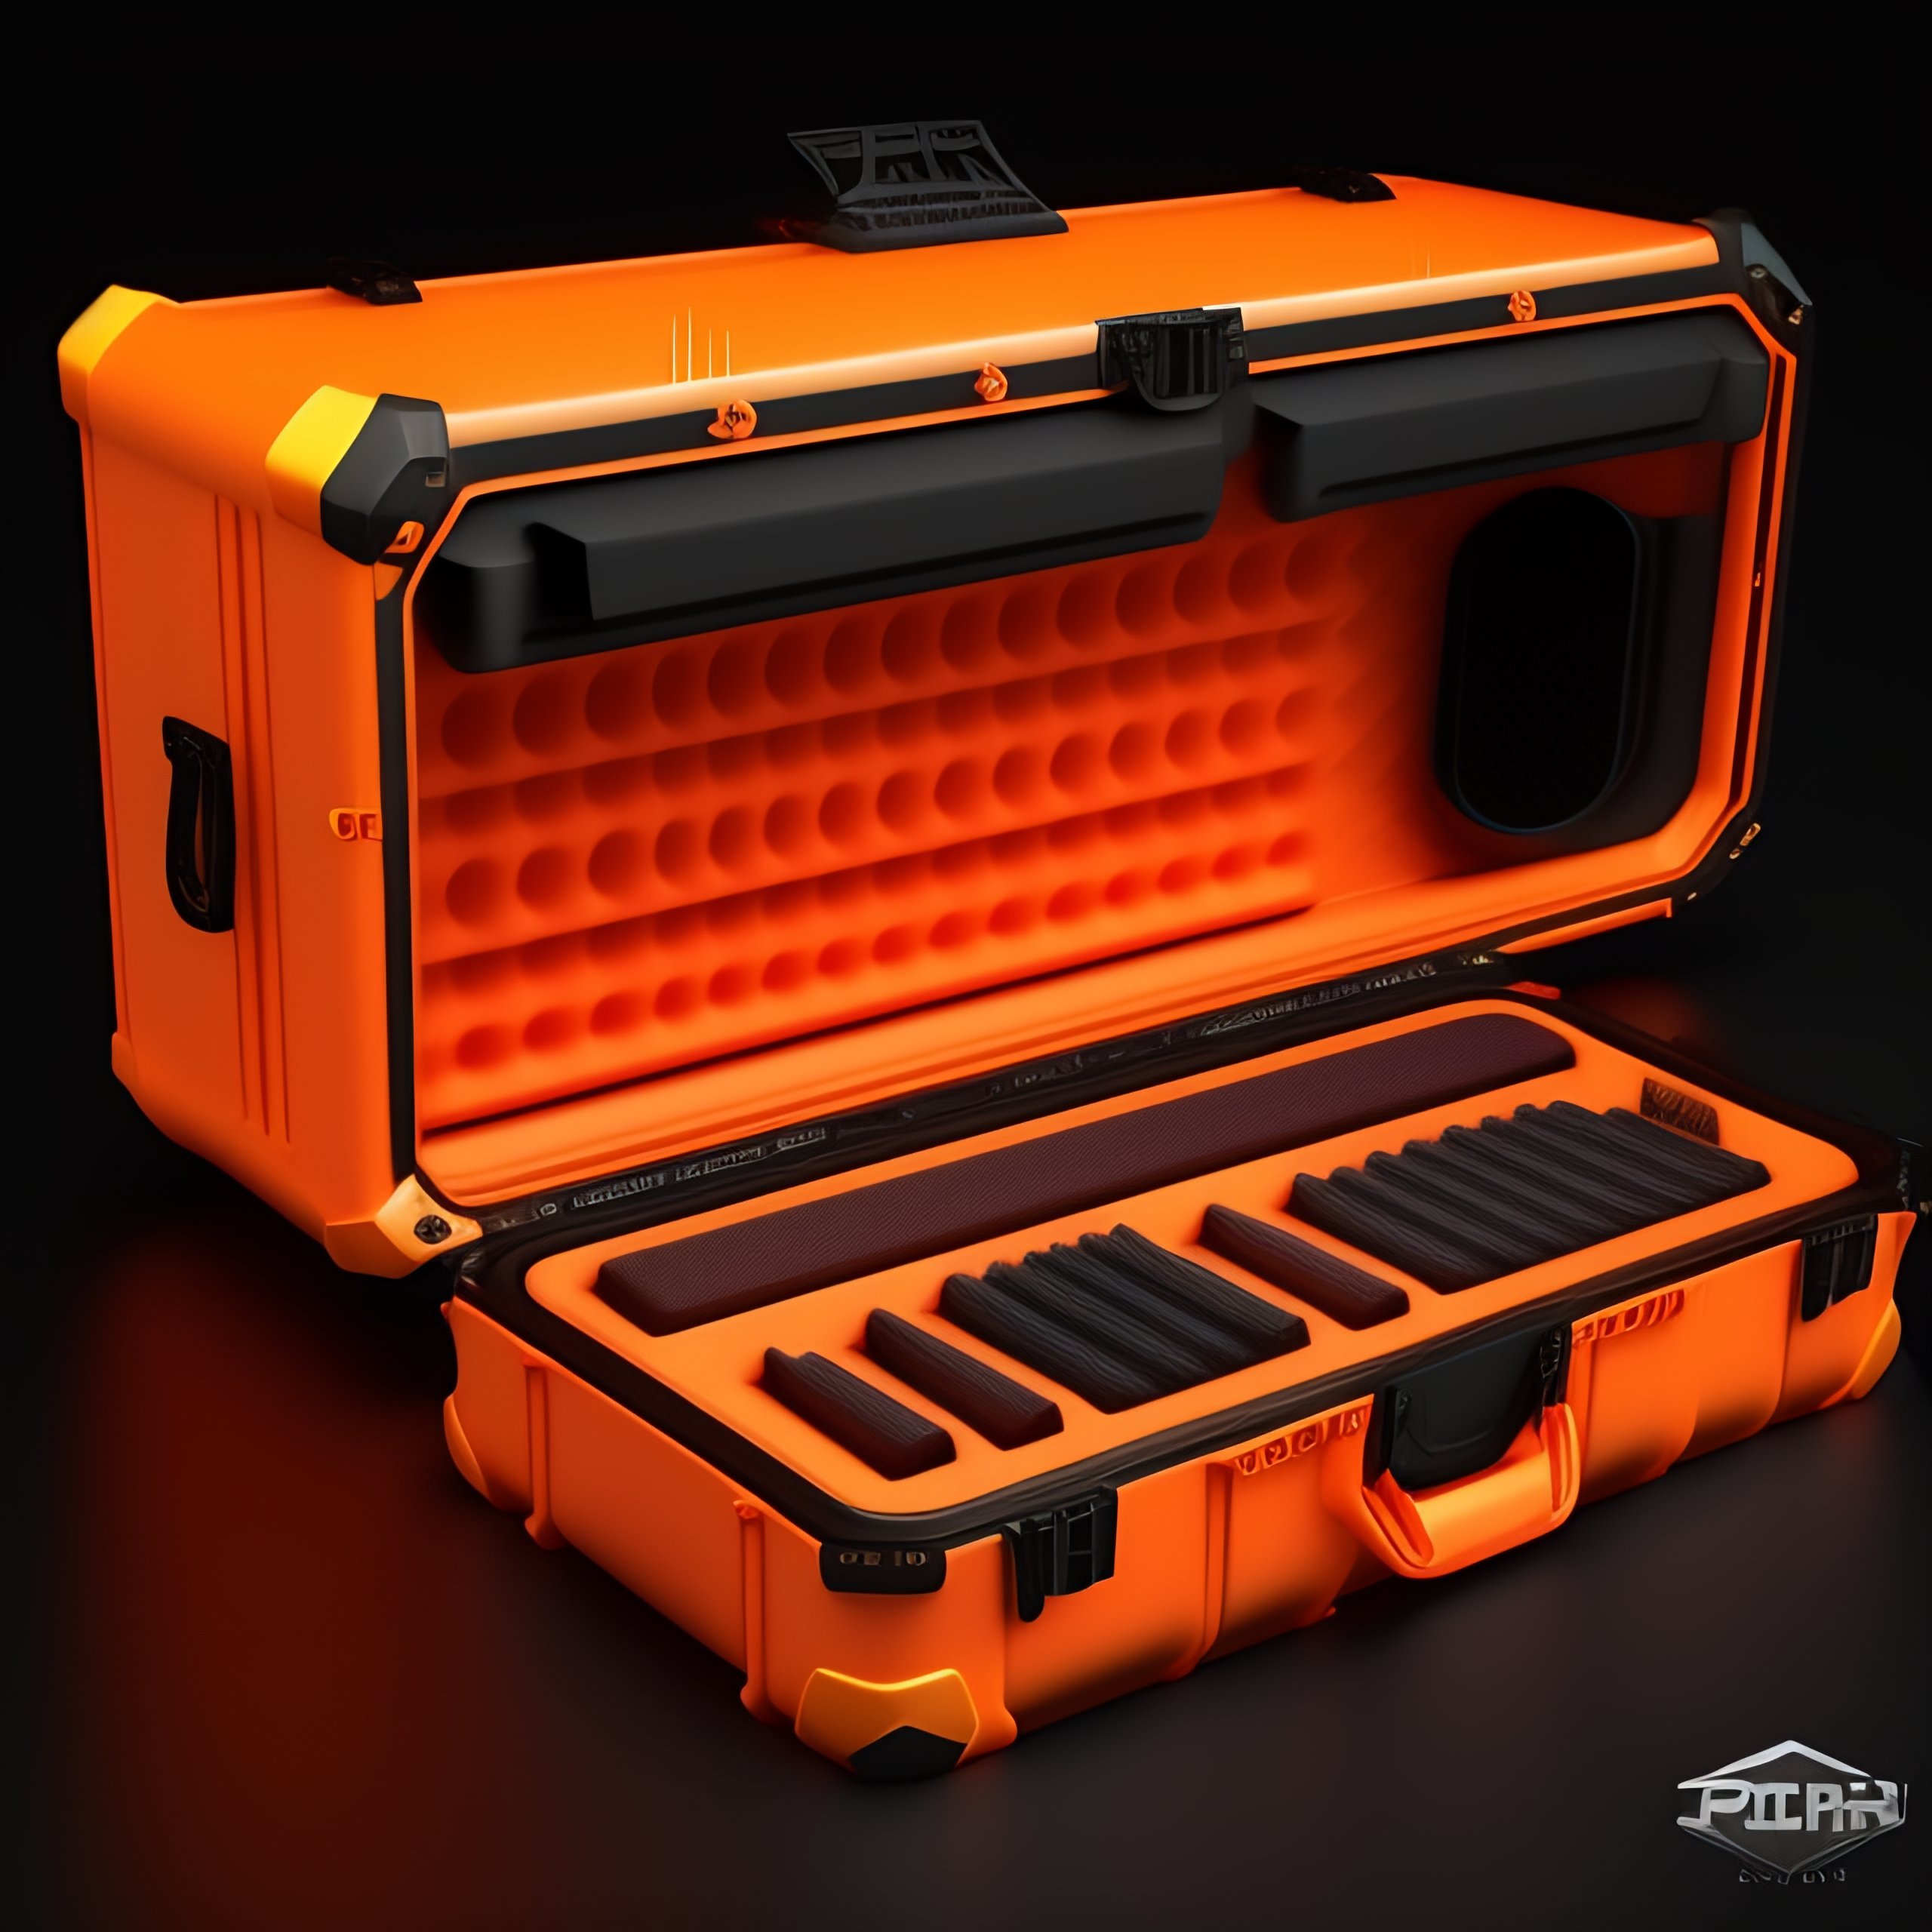 Lexica - CS-GO deluxe box case for skin collection, hollographic orange  details color, Knolling layout, Highly detailed, Depth, Lumen render, 8k